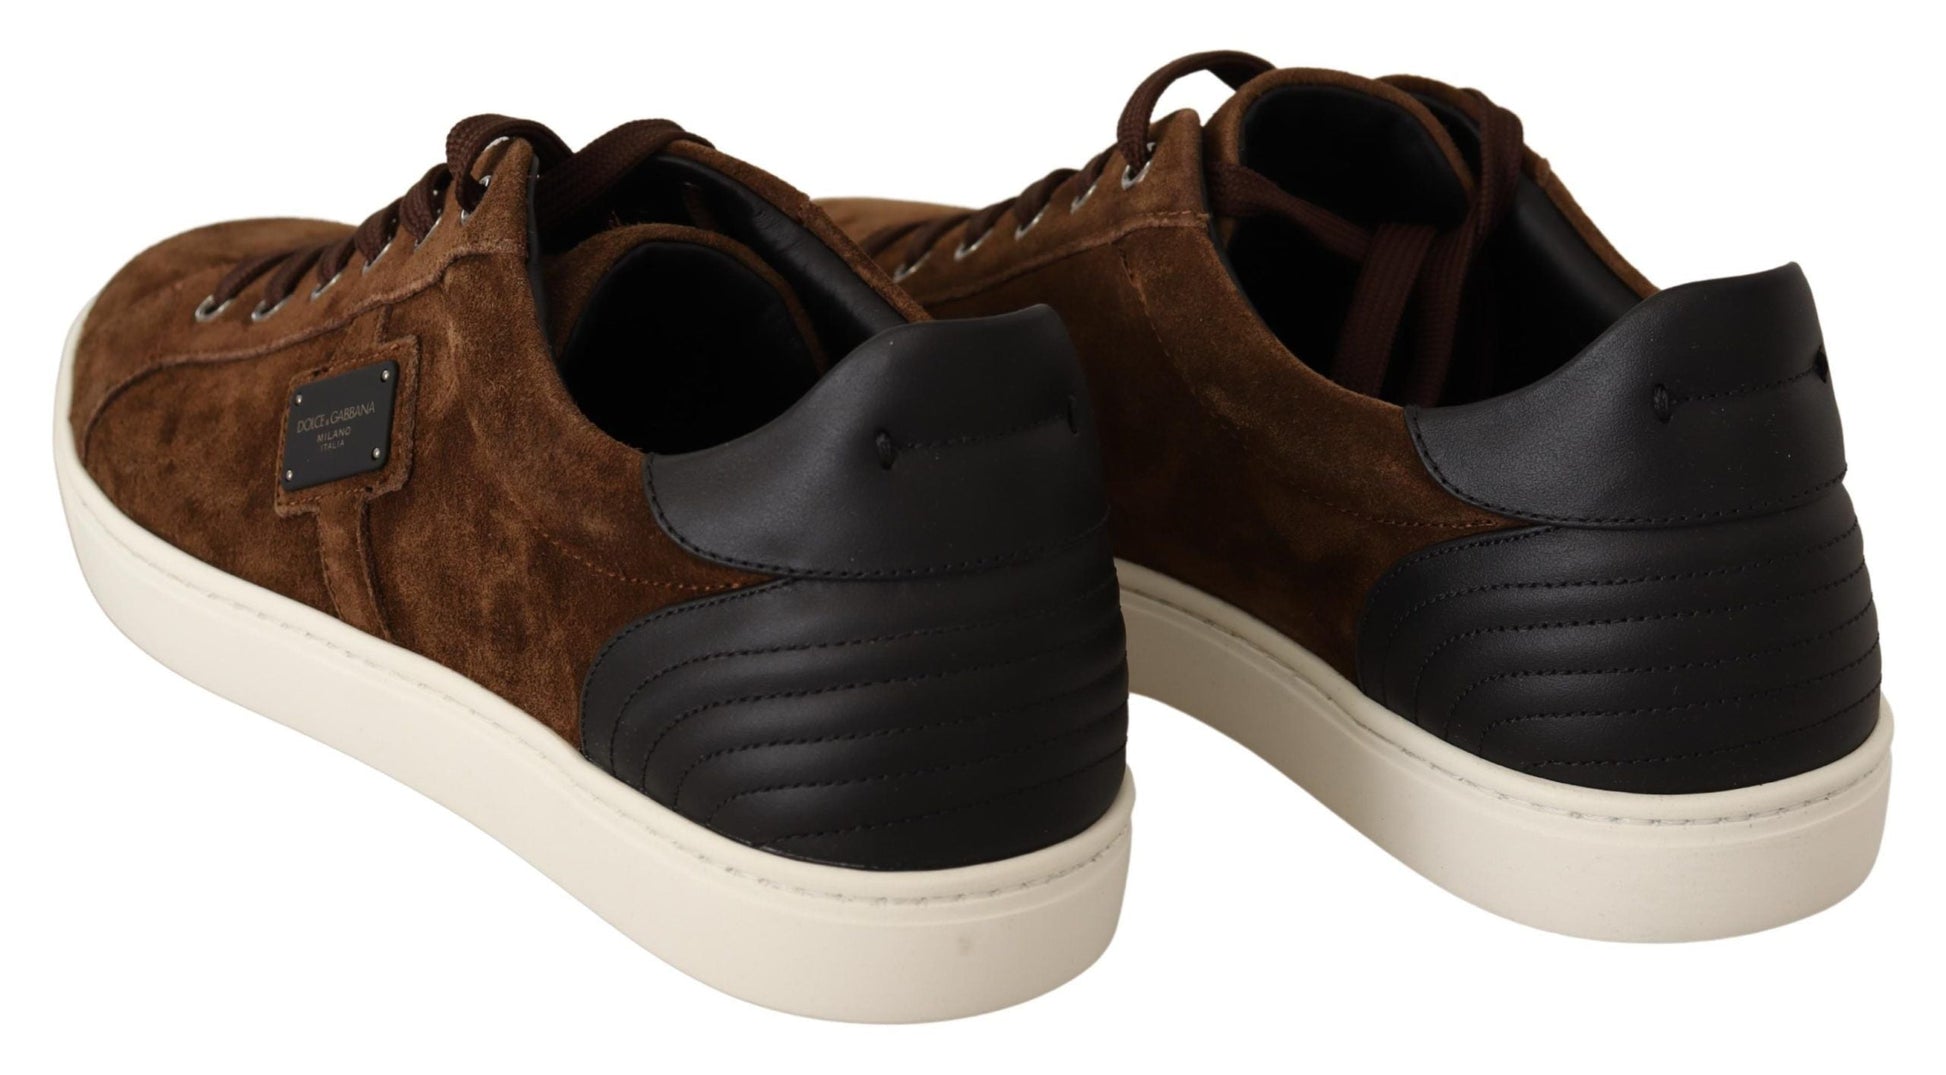 Dolce & Gabbana Brown Suede Leather Men Sneakers | Fashionsarah.com